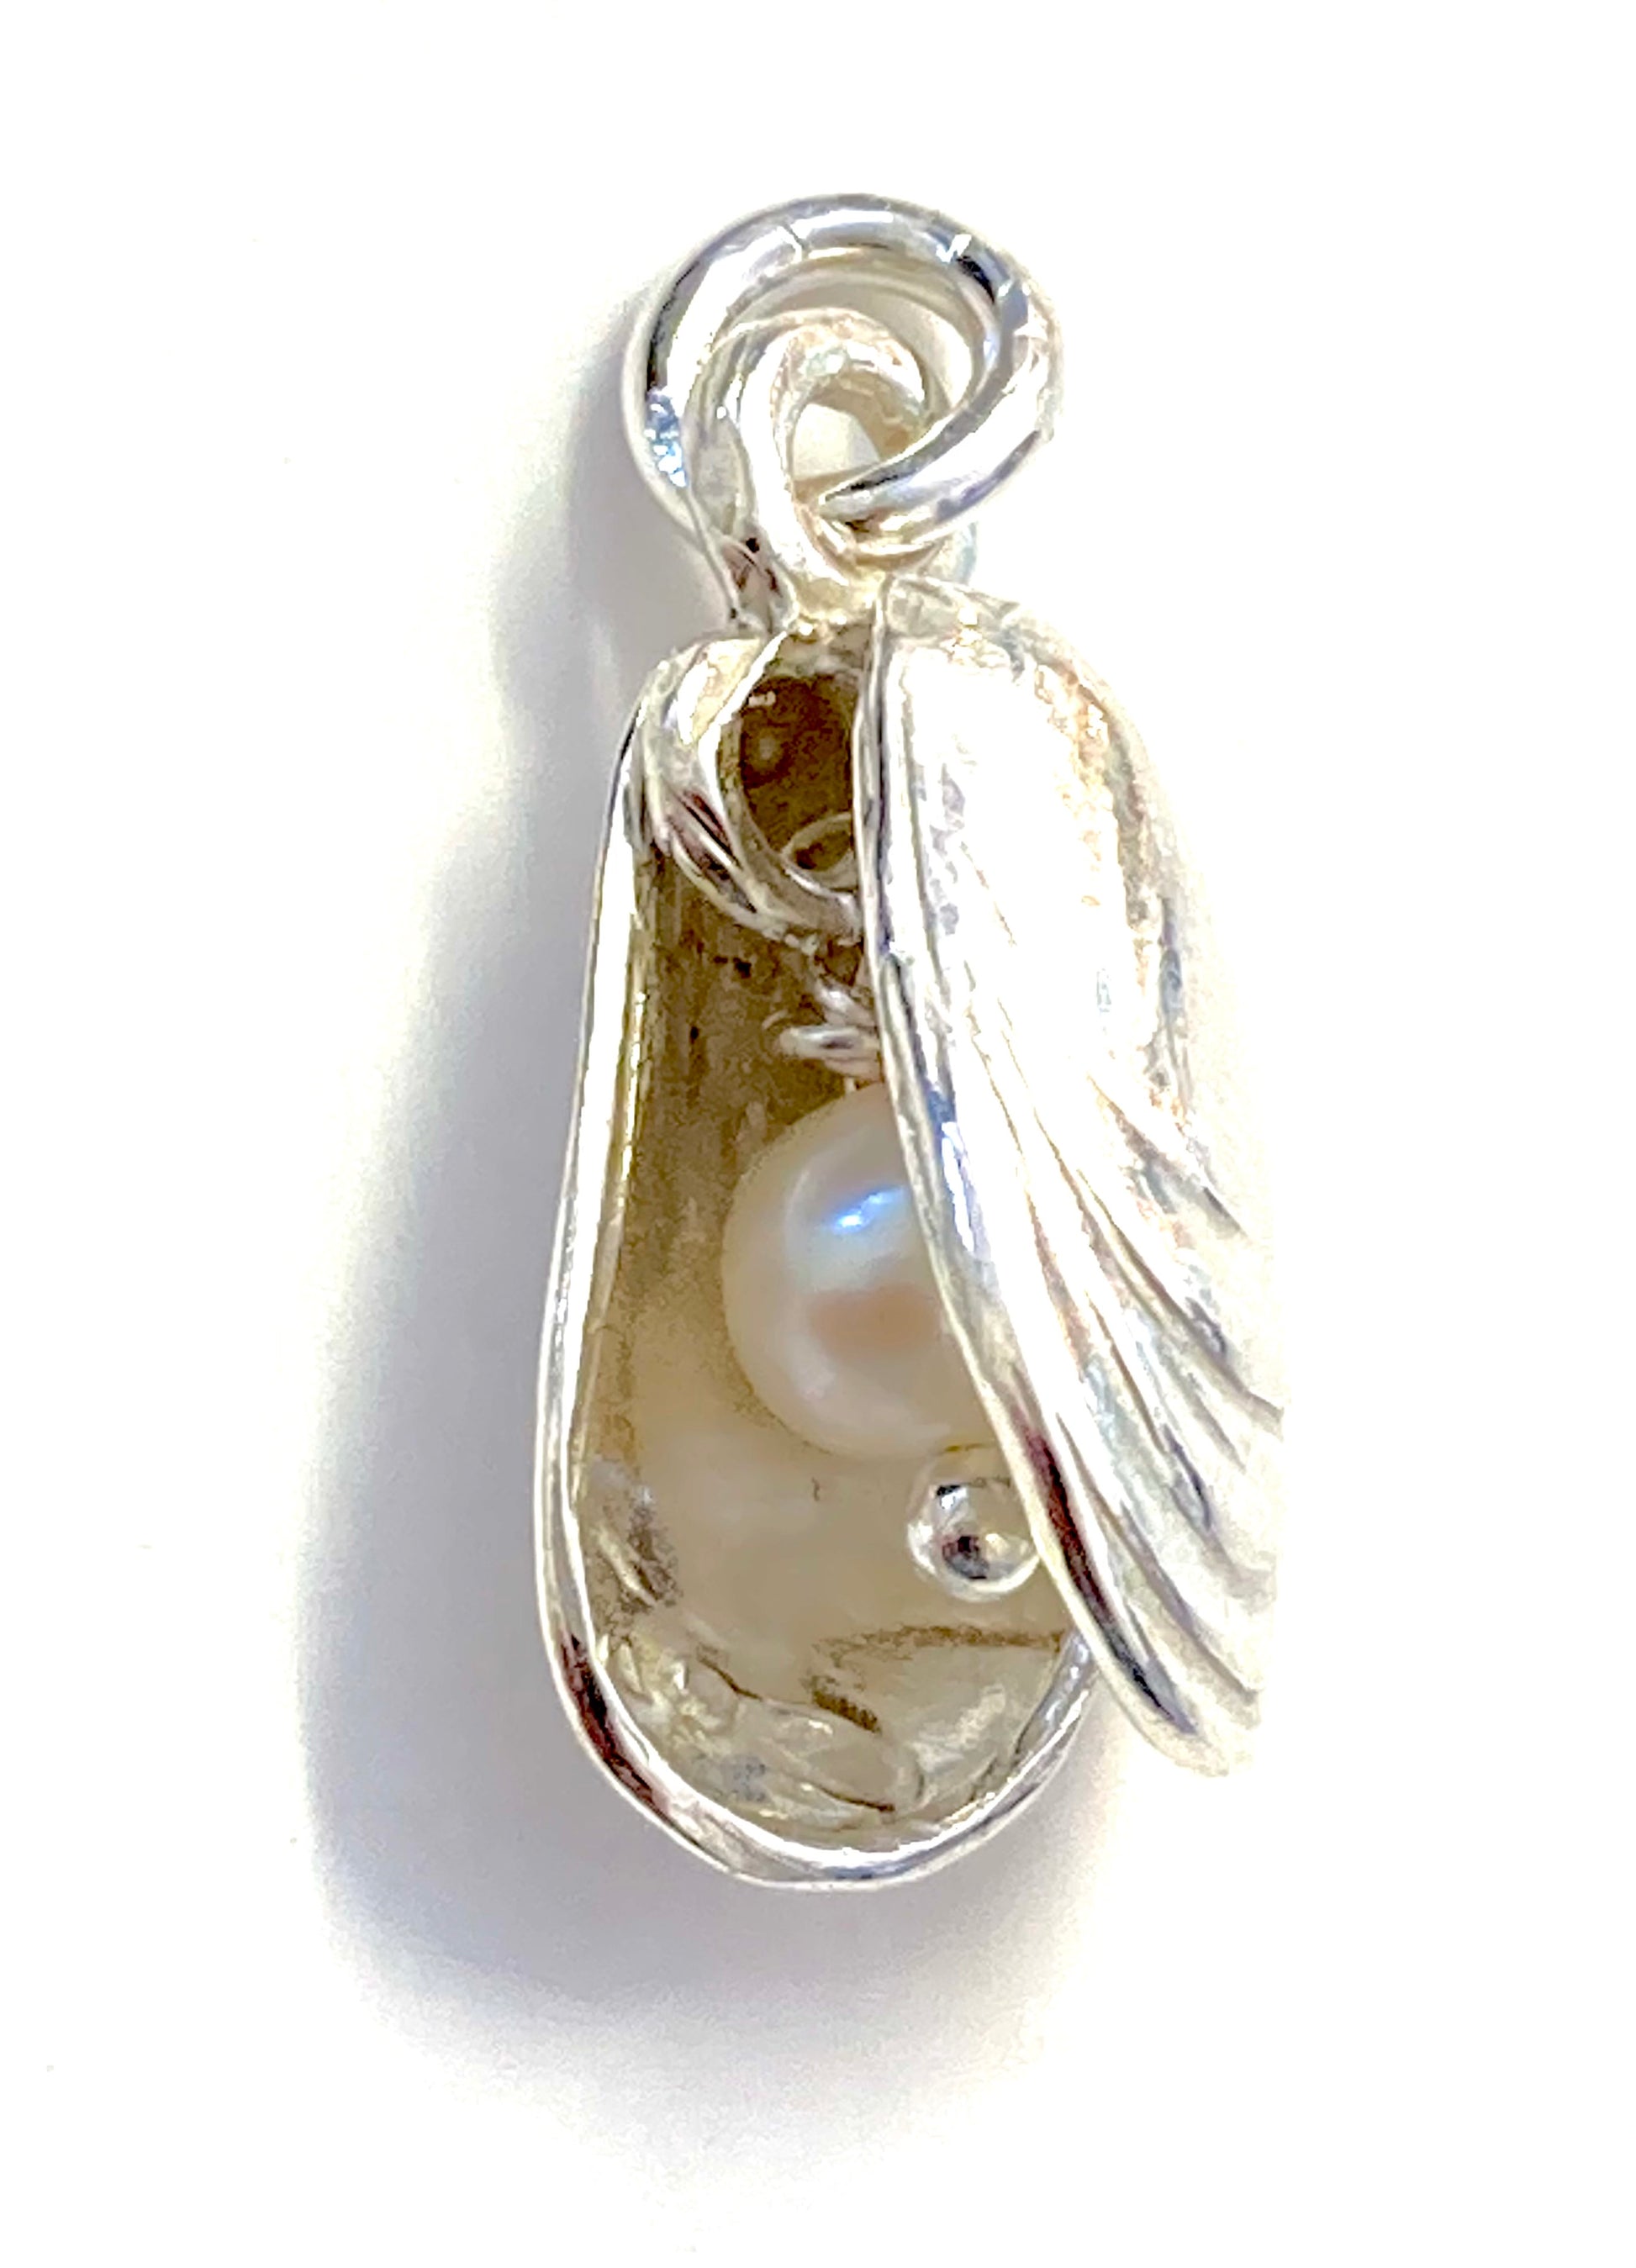 Mussel shell charm with white pearl